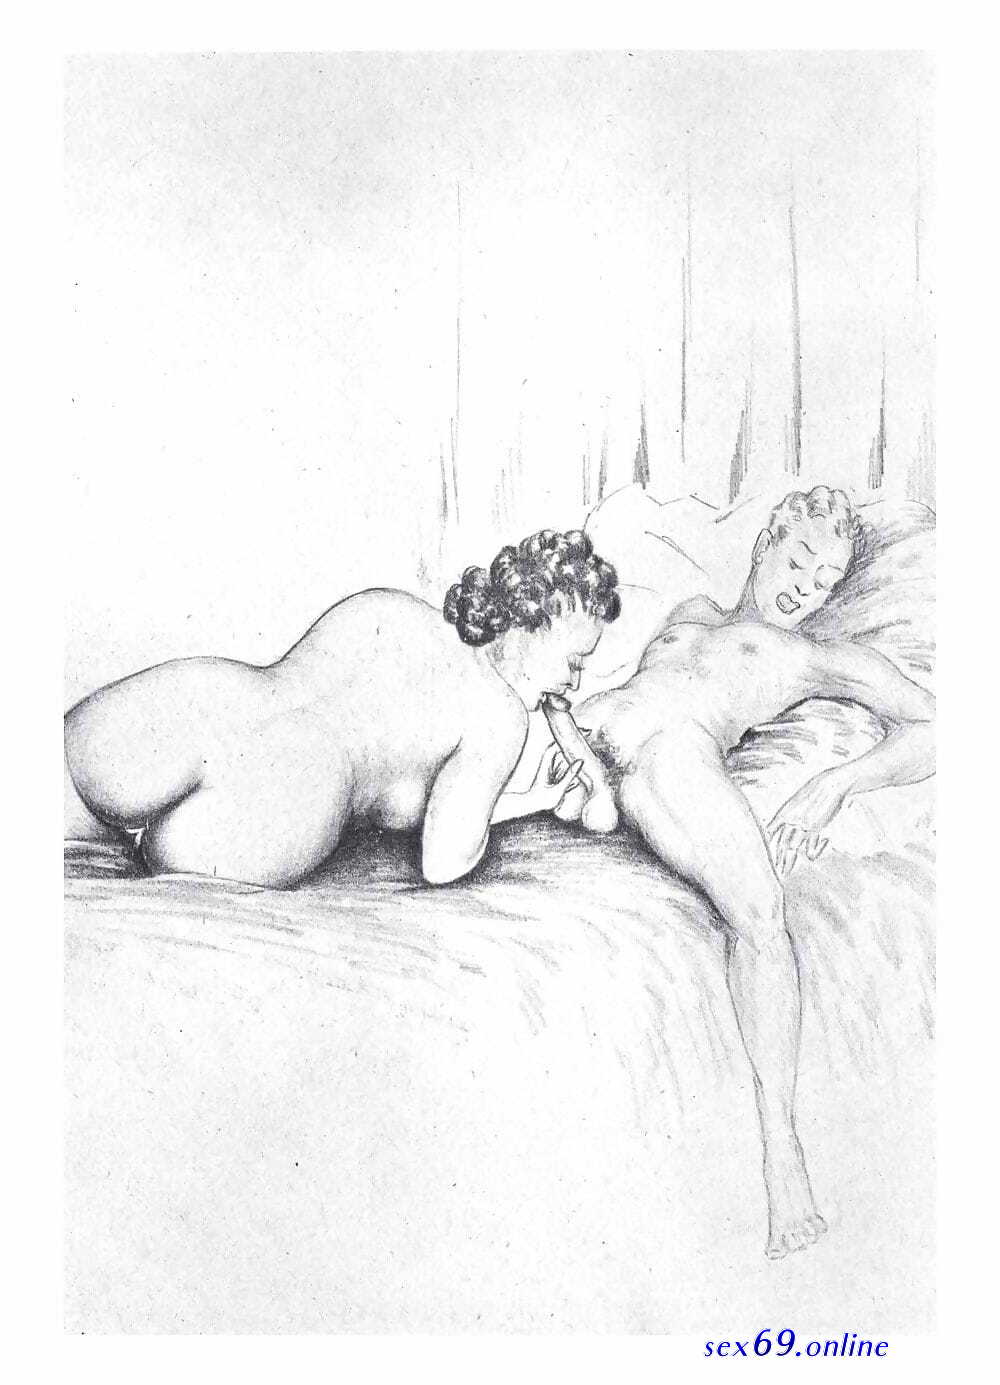 incest retro drawing galleries.net - Sexy photos